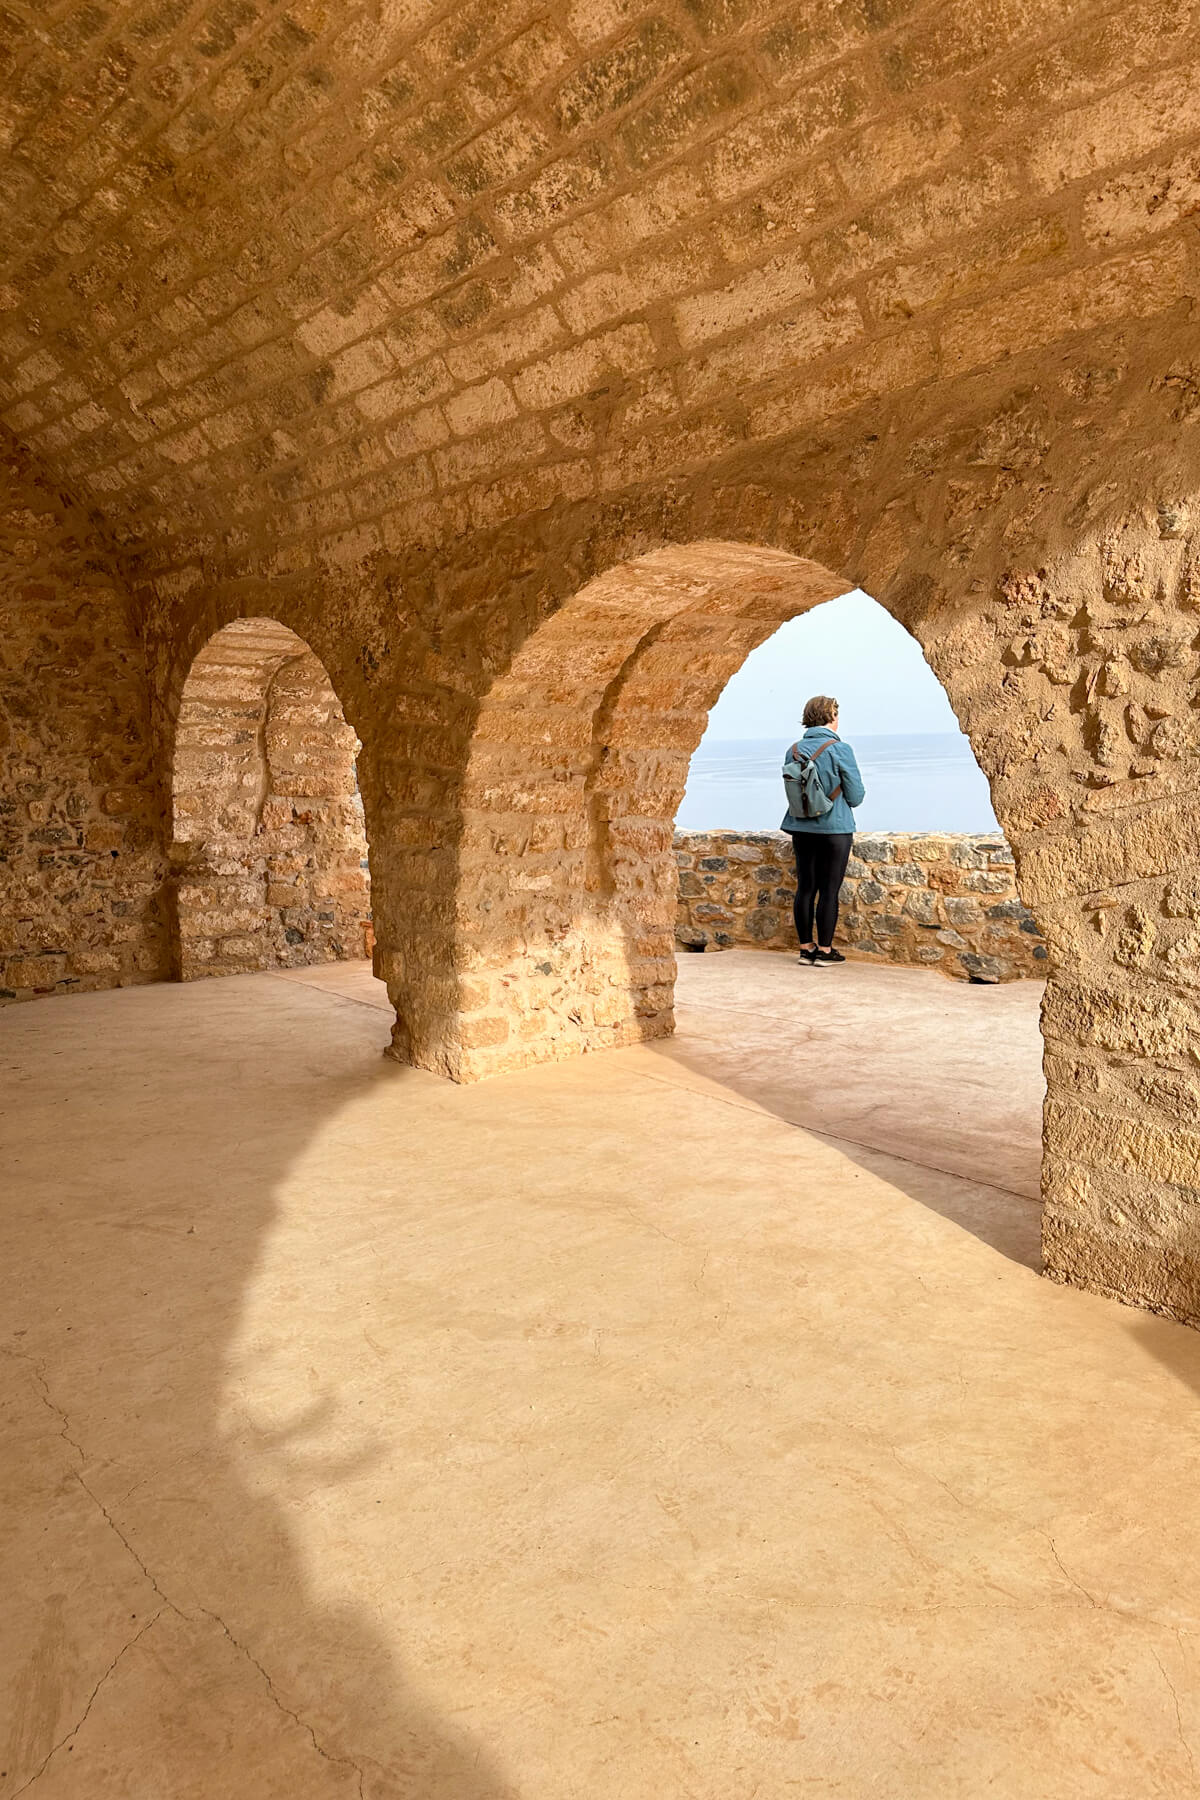 A woman looking out over the Mediterranean Sea under a stone archway